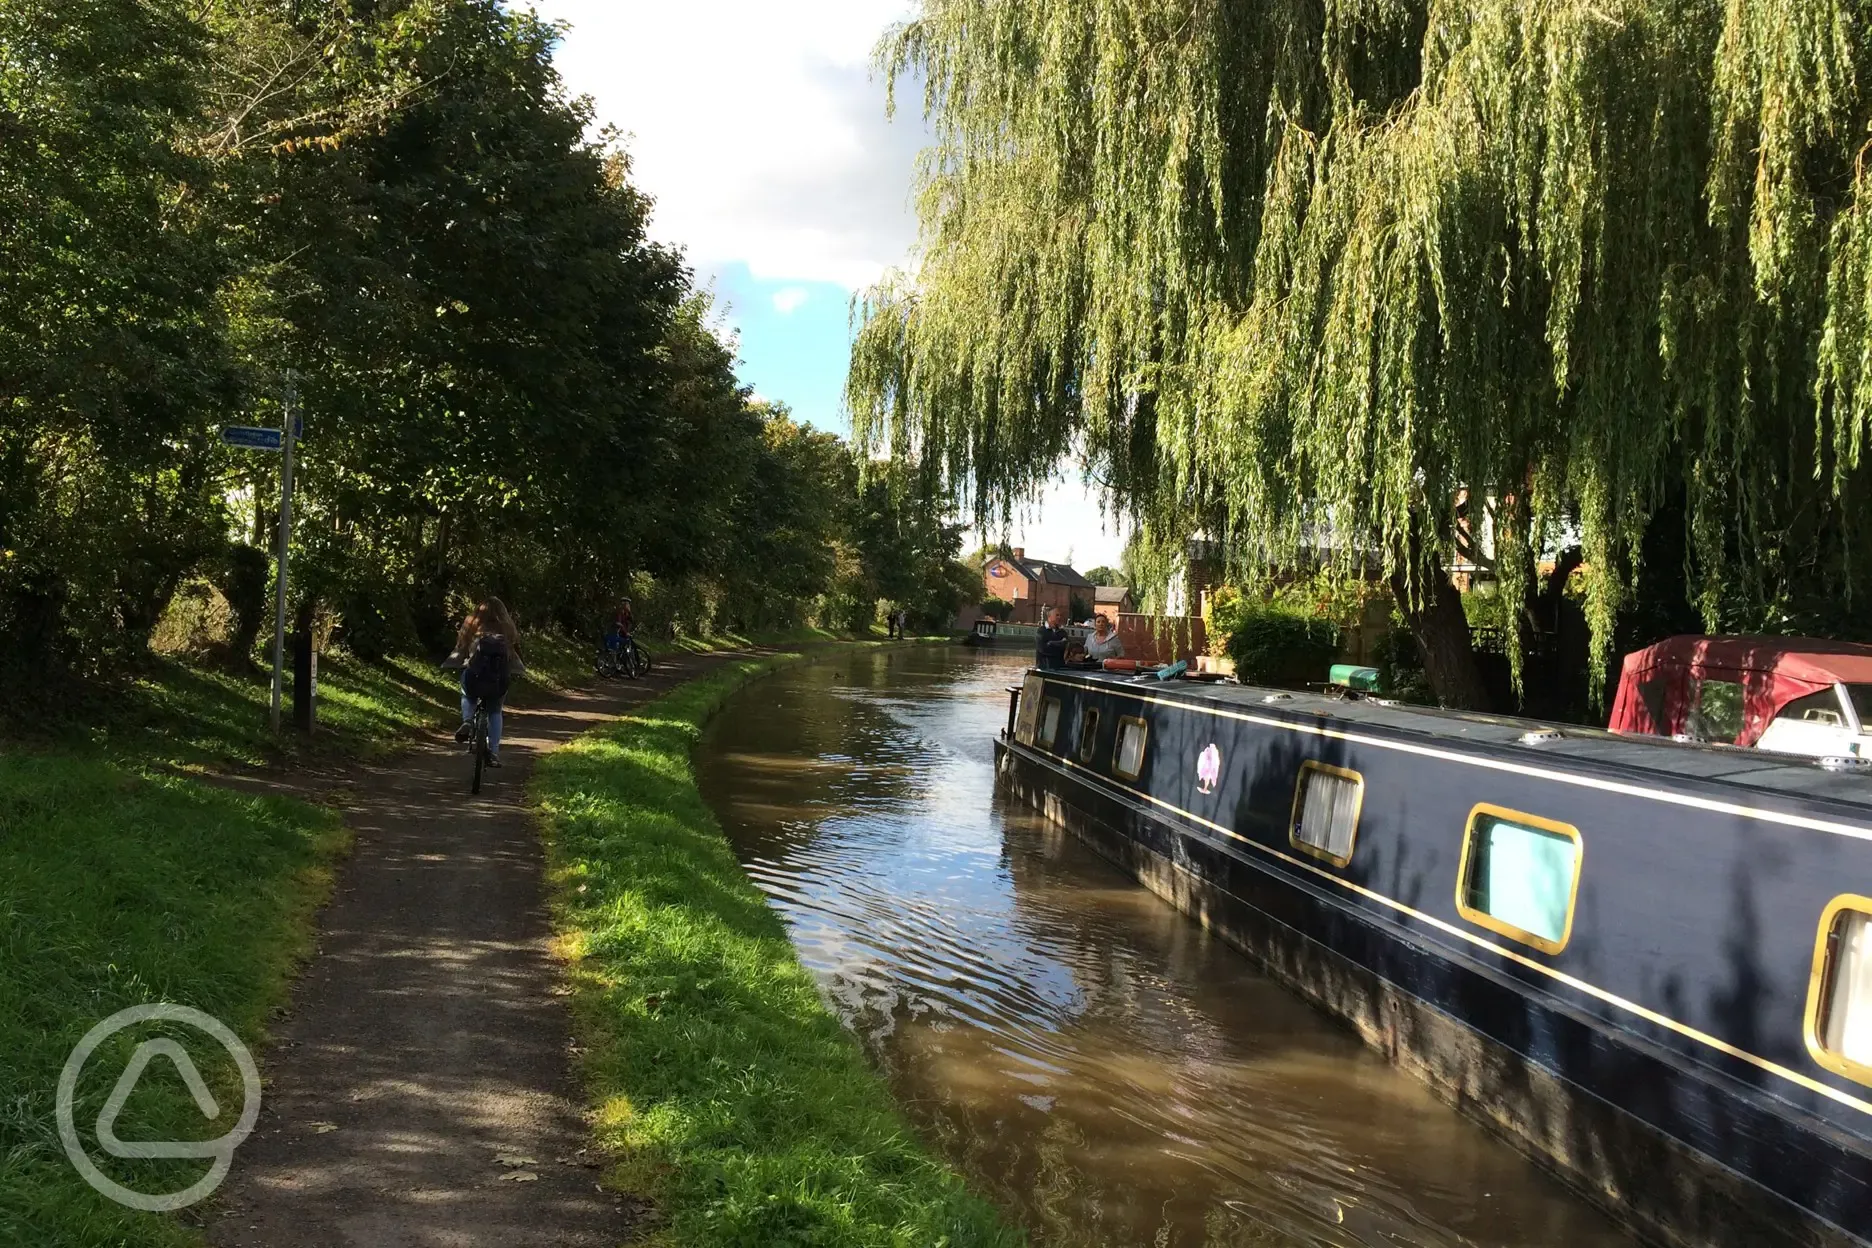 The delights of The Shropshire Union Canal